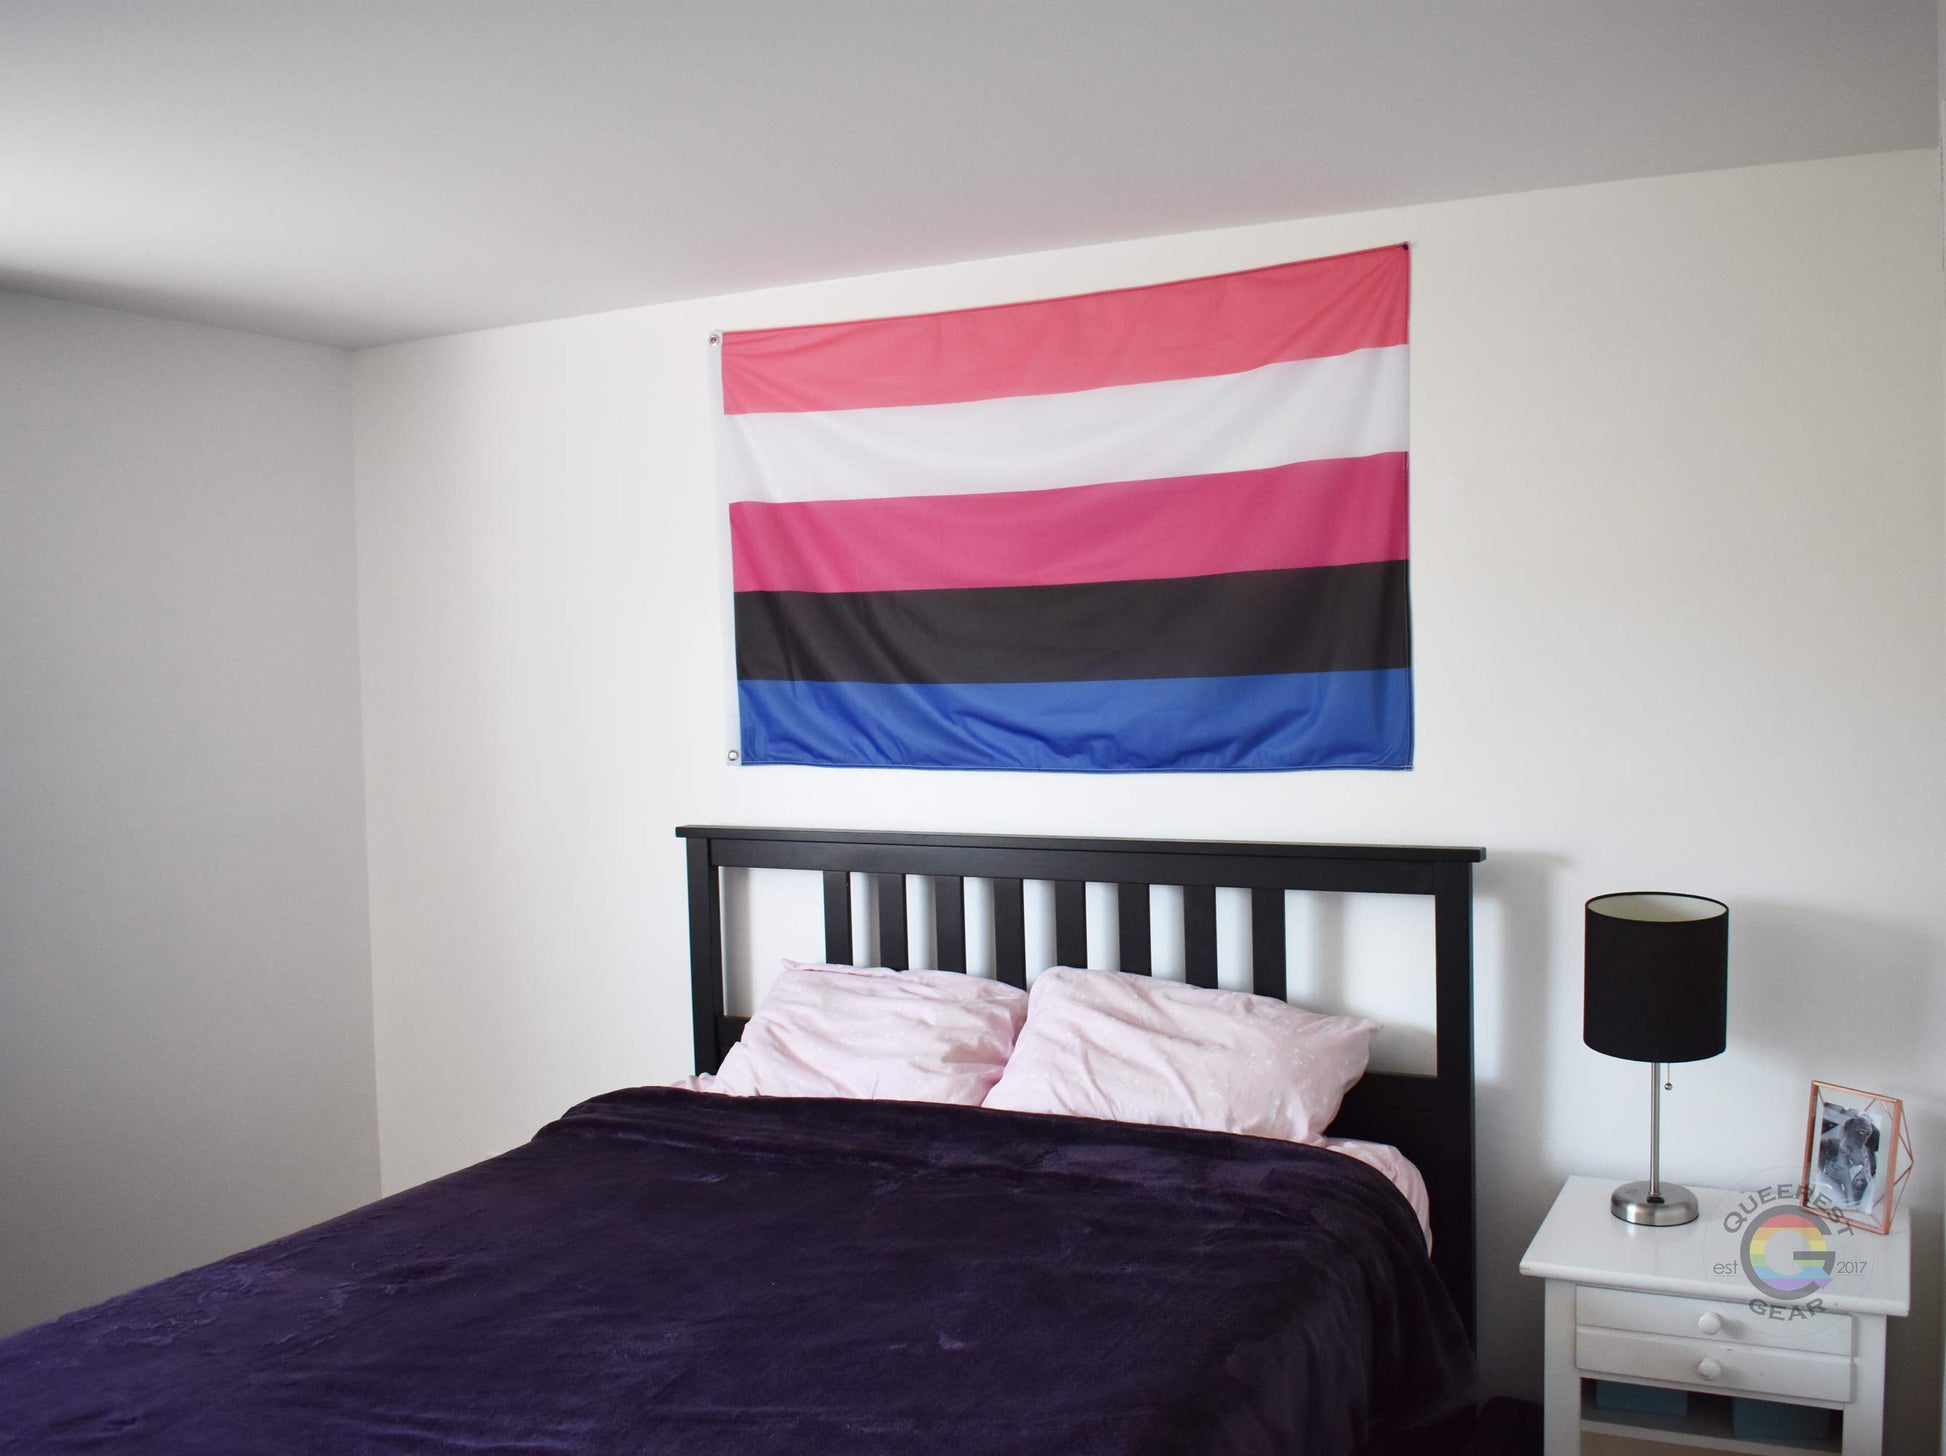 3’x5’ genderfluid pride flag hanging horizontally on the wall of a bedroom centered above a bed with a purple blanket